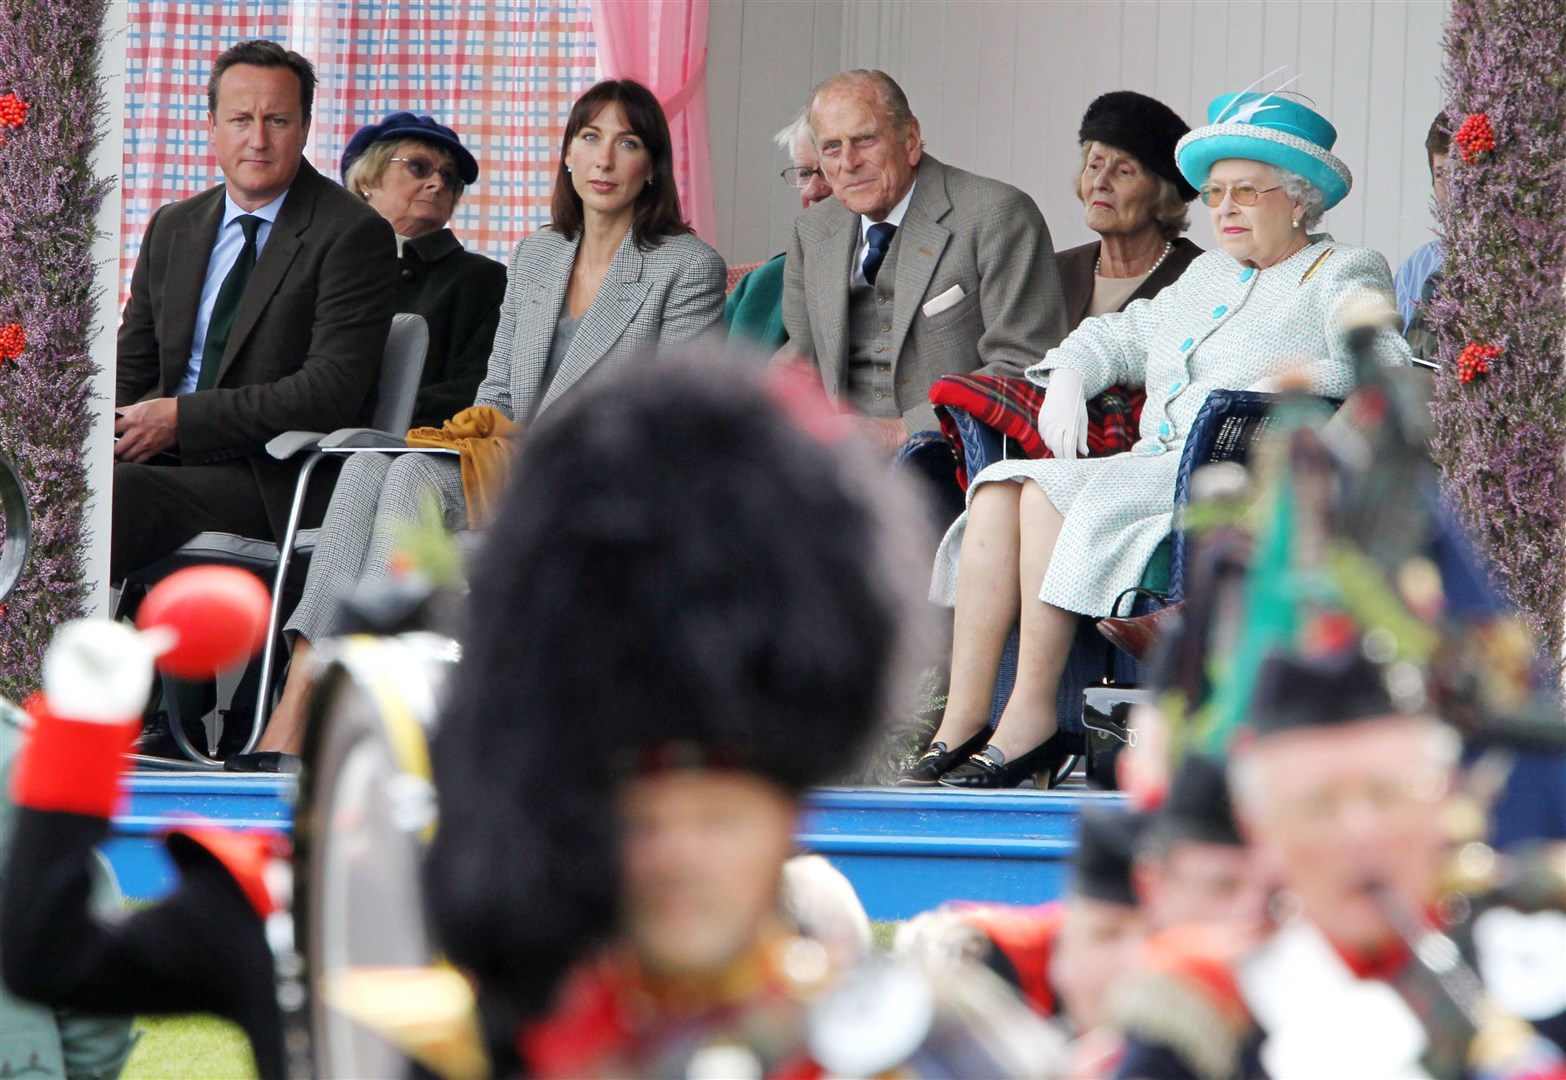 The Queen watching proceedings with, left to right, David Cameron, his wife Samantha Cameron and the Duke of Edinburgh at the Braemar Gathering in Braemar (Andrew Milligan/PA)